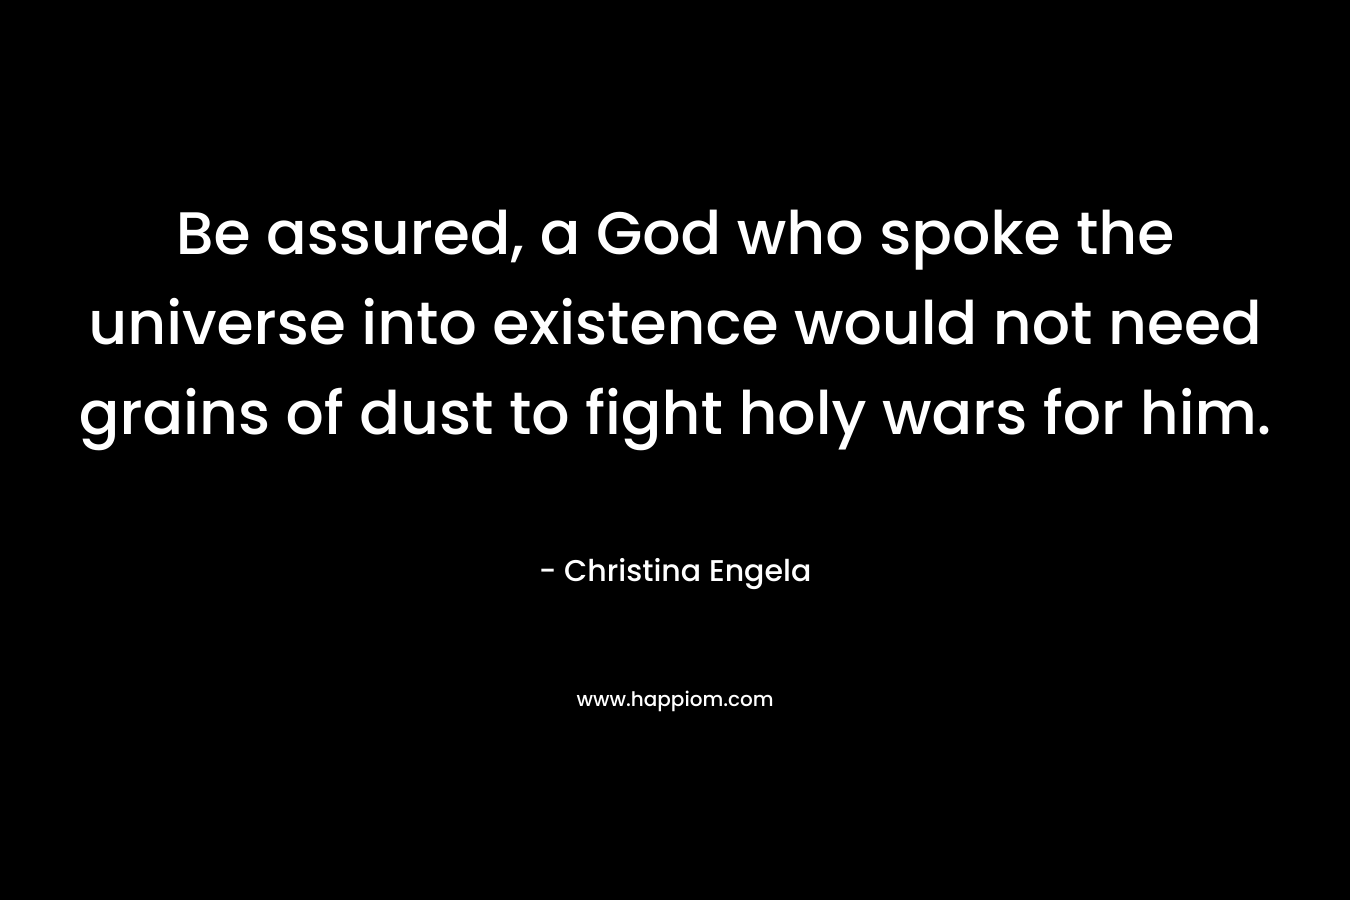 Be assured, a God who spoke the universe into existence would not need grains of dust to fight holy wars for him.